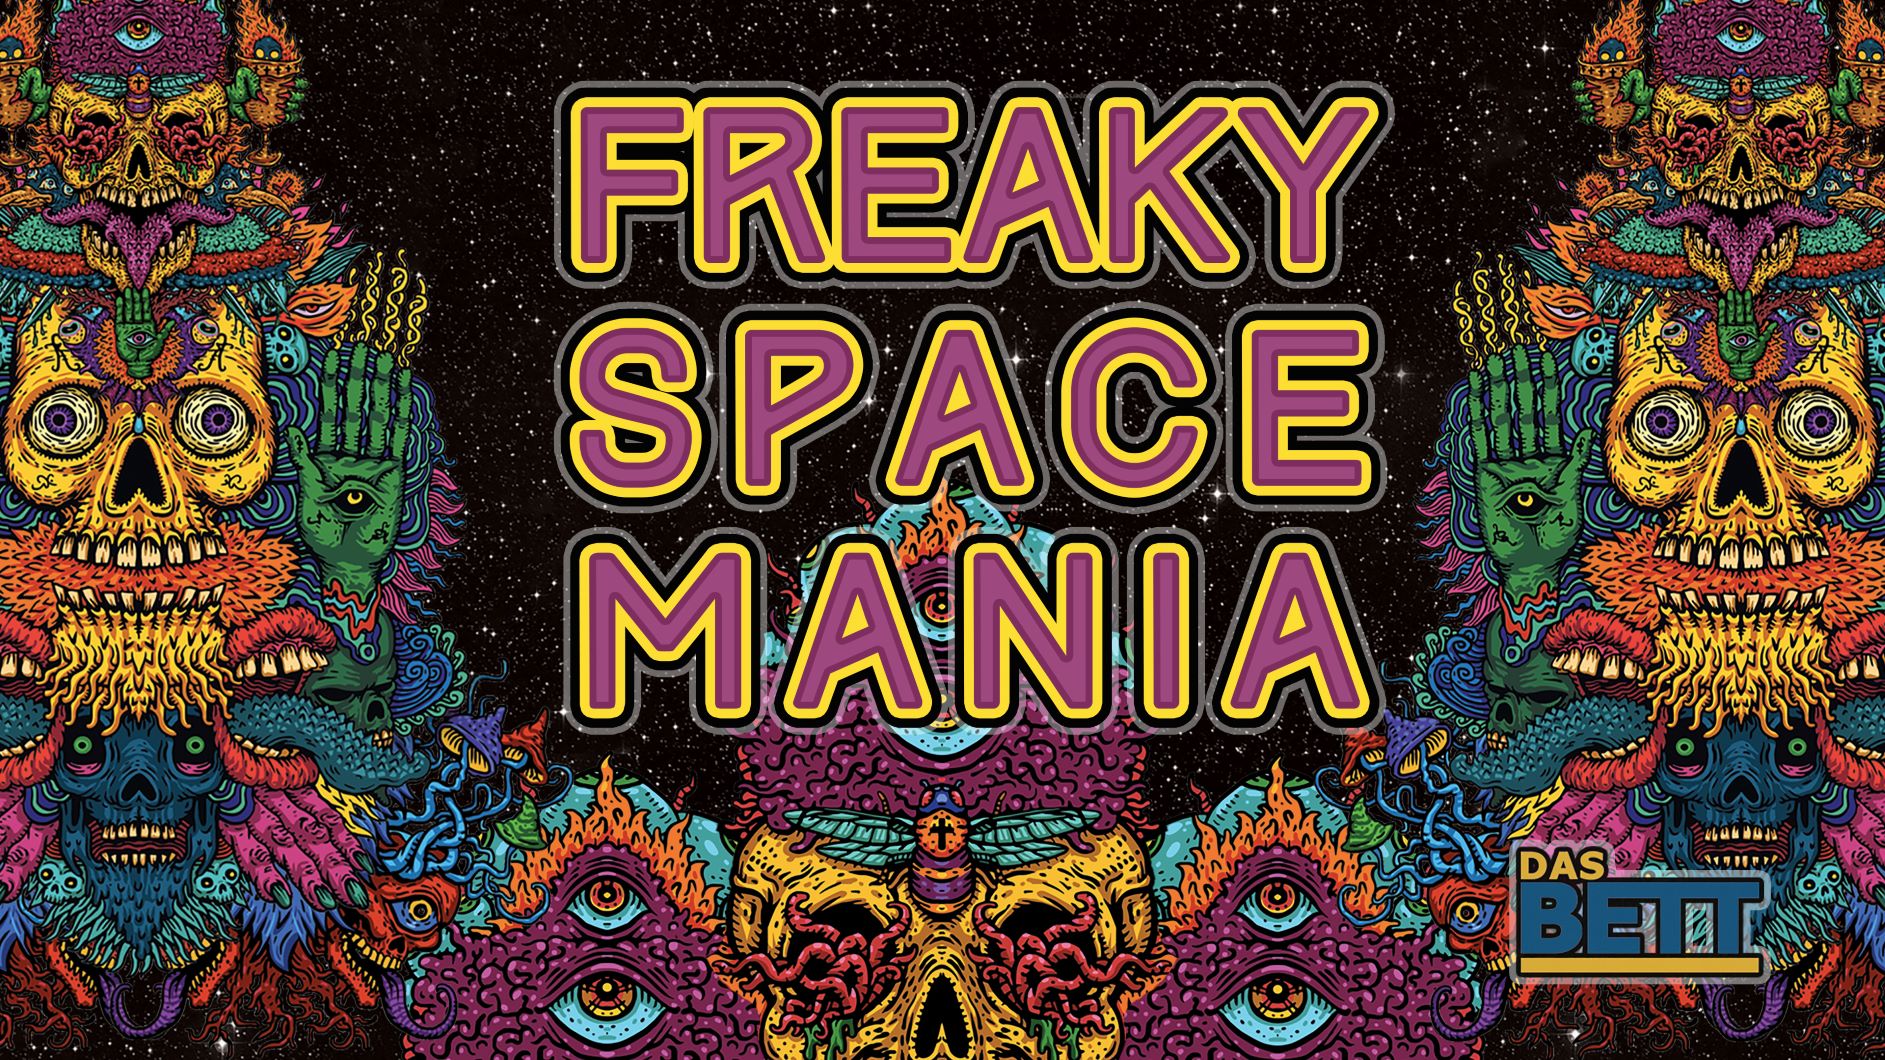 FREAKY SPACE MANIA – Goaparty mit Psyconoclast, Future Hippie, Dunkel-Schnell, Dr.Fluffy vs Absolem…